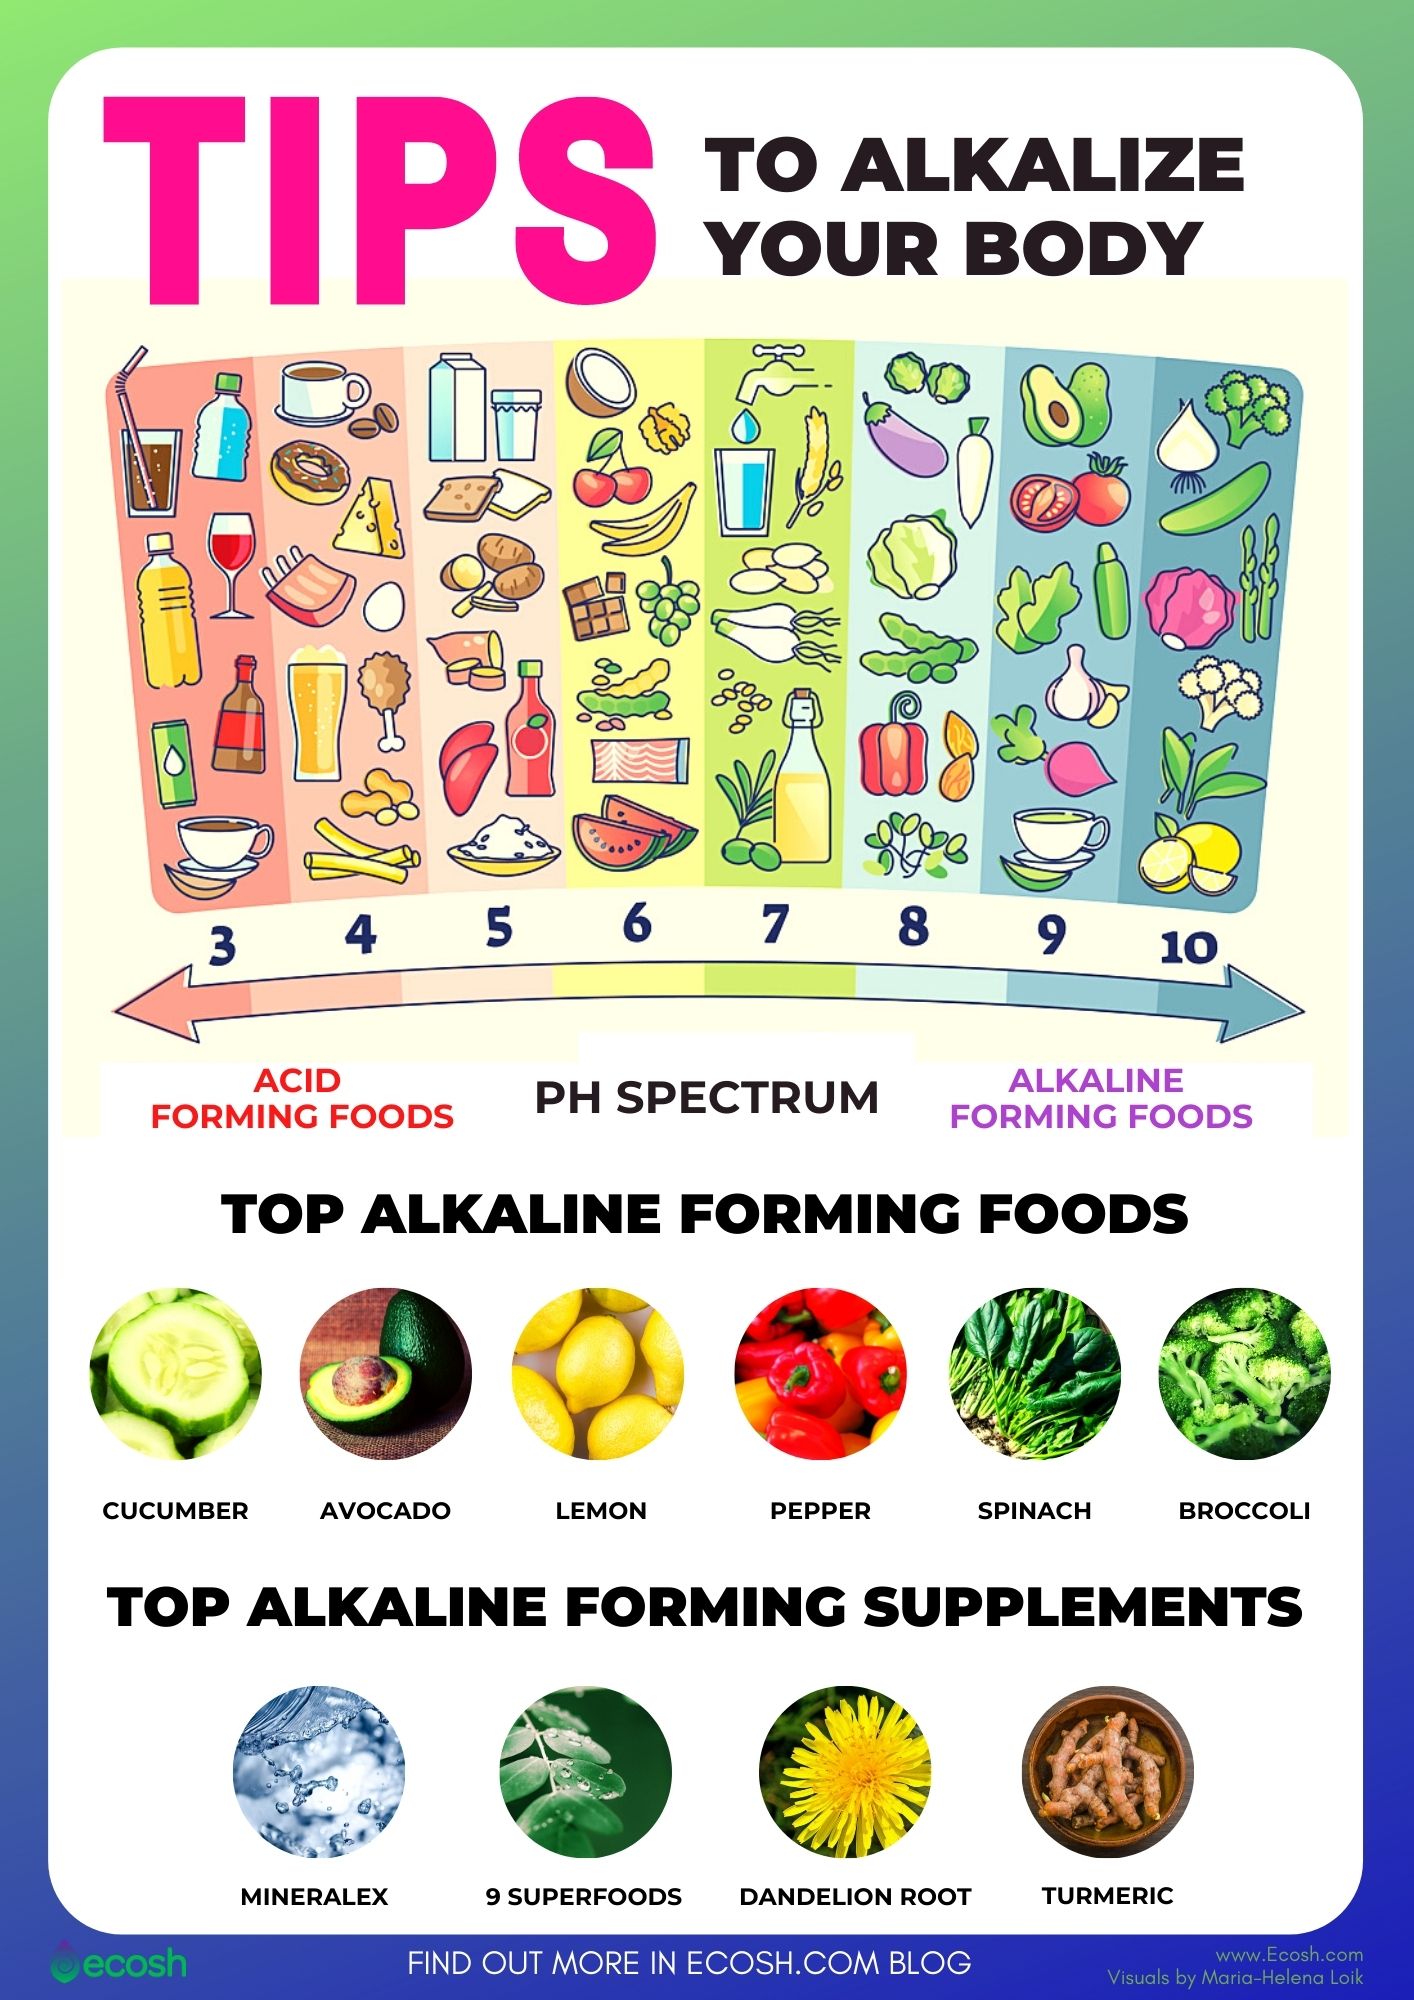 Tips_to_Alkalize_Your_Body_How_To_Alkalize_Your_Body